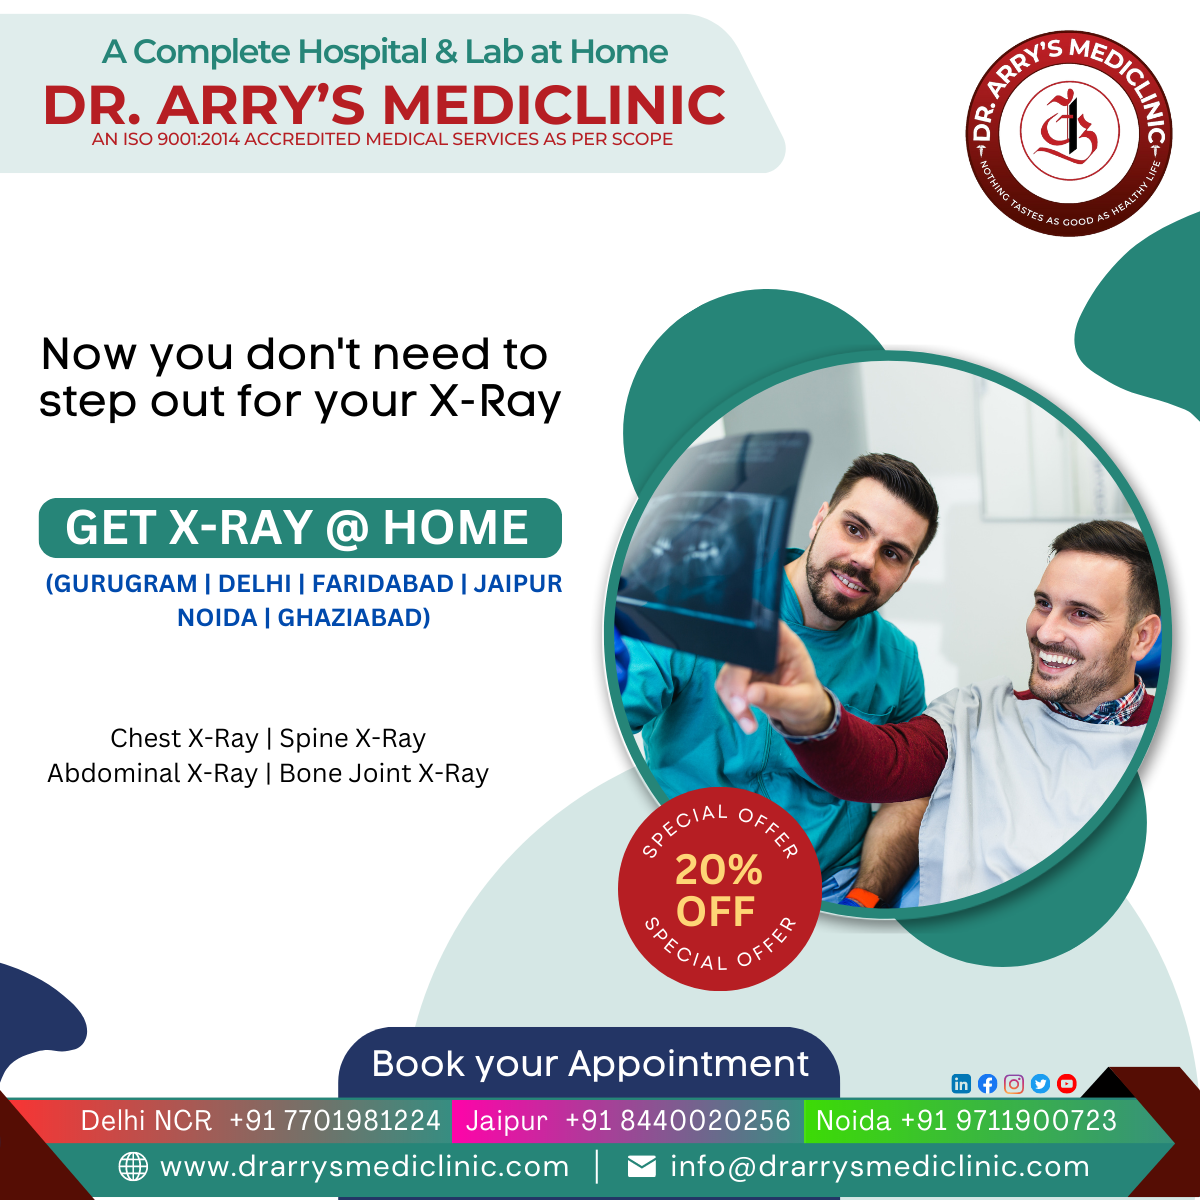 Xray at home- Dr.Arry's Mediclinic